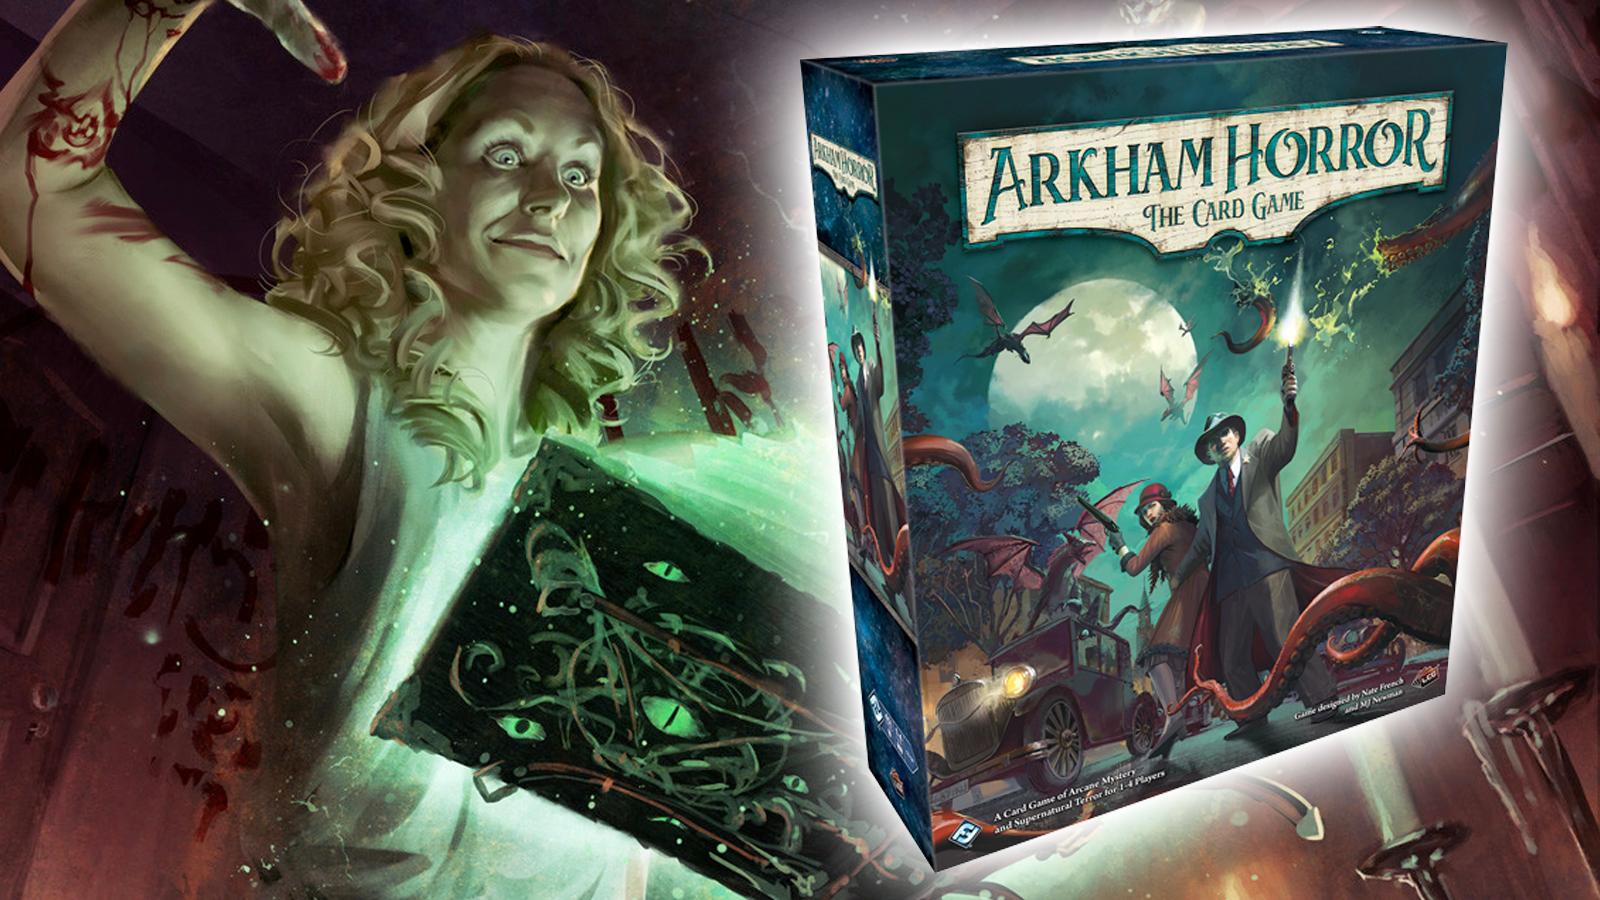 arkham horror the card game art with the box overlayed